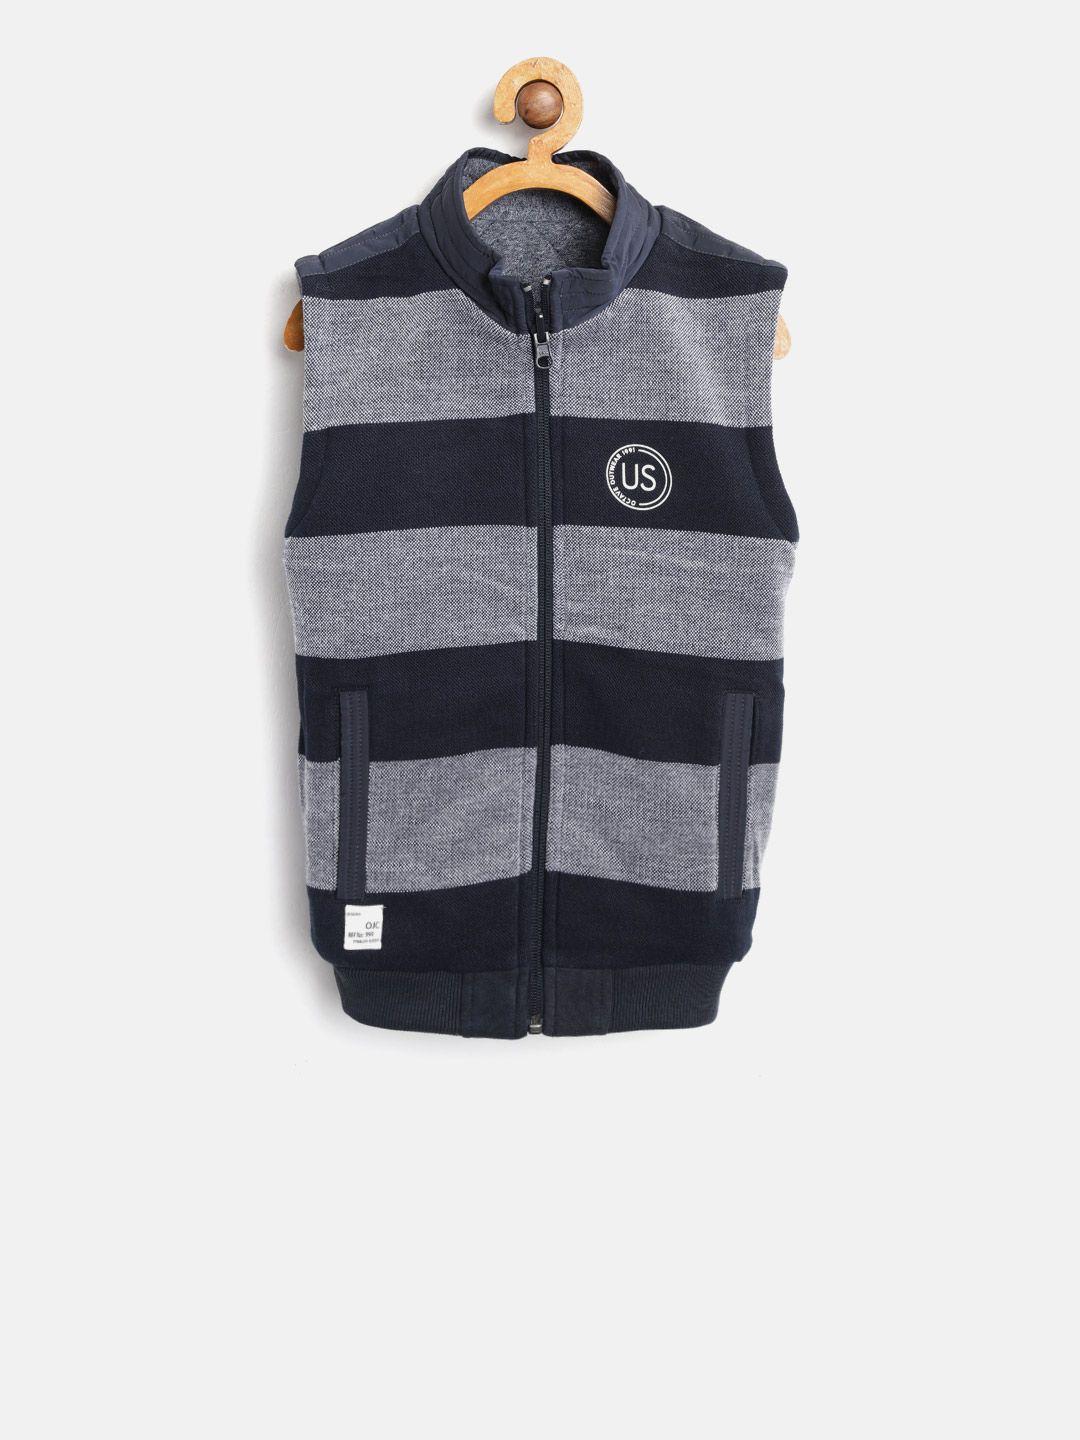 octave boys navy blue & off-white striped reversible tailored jacket